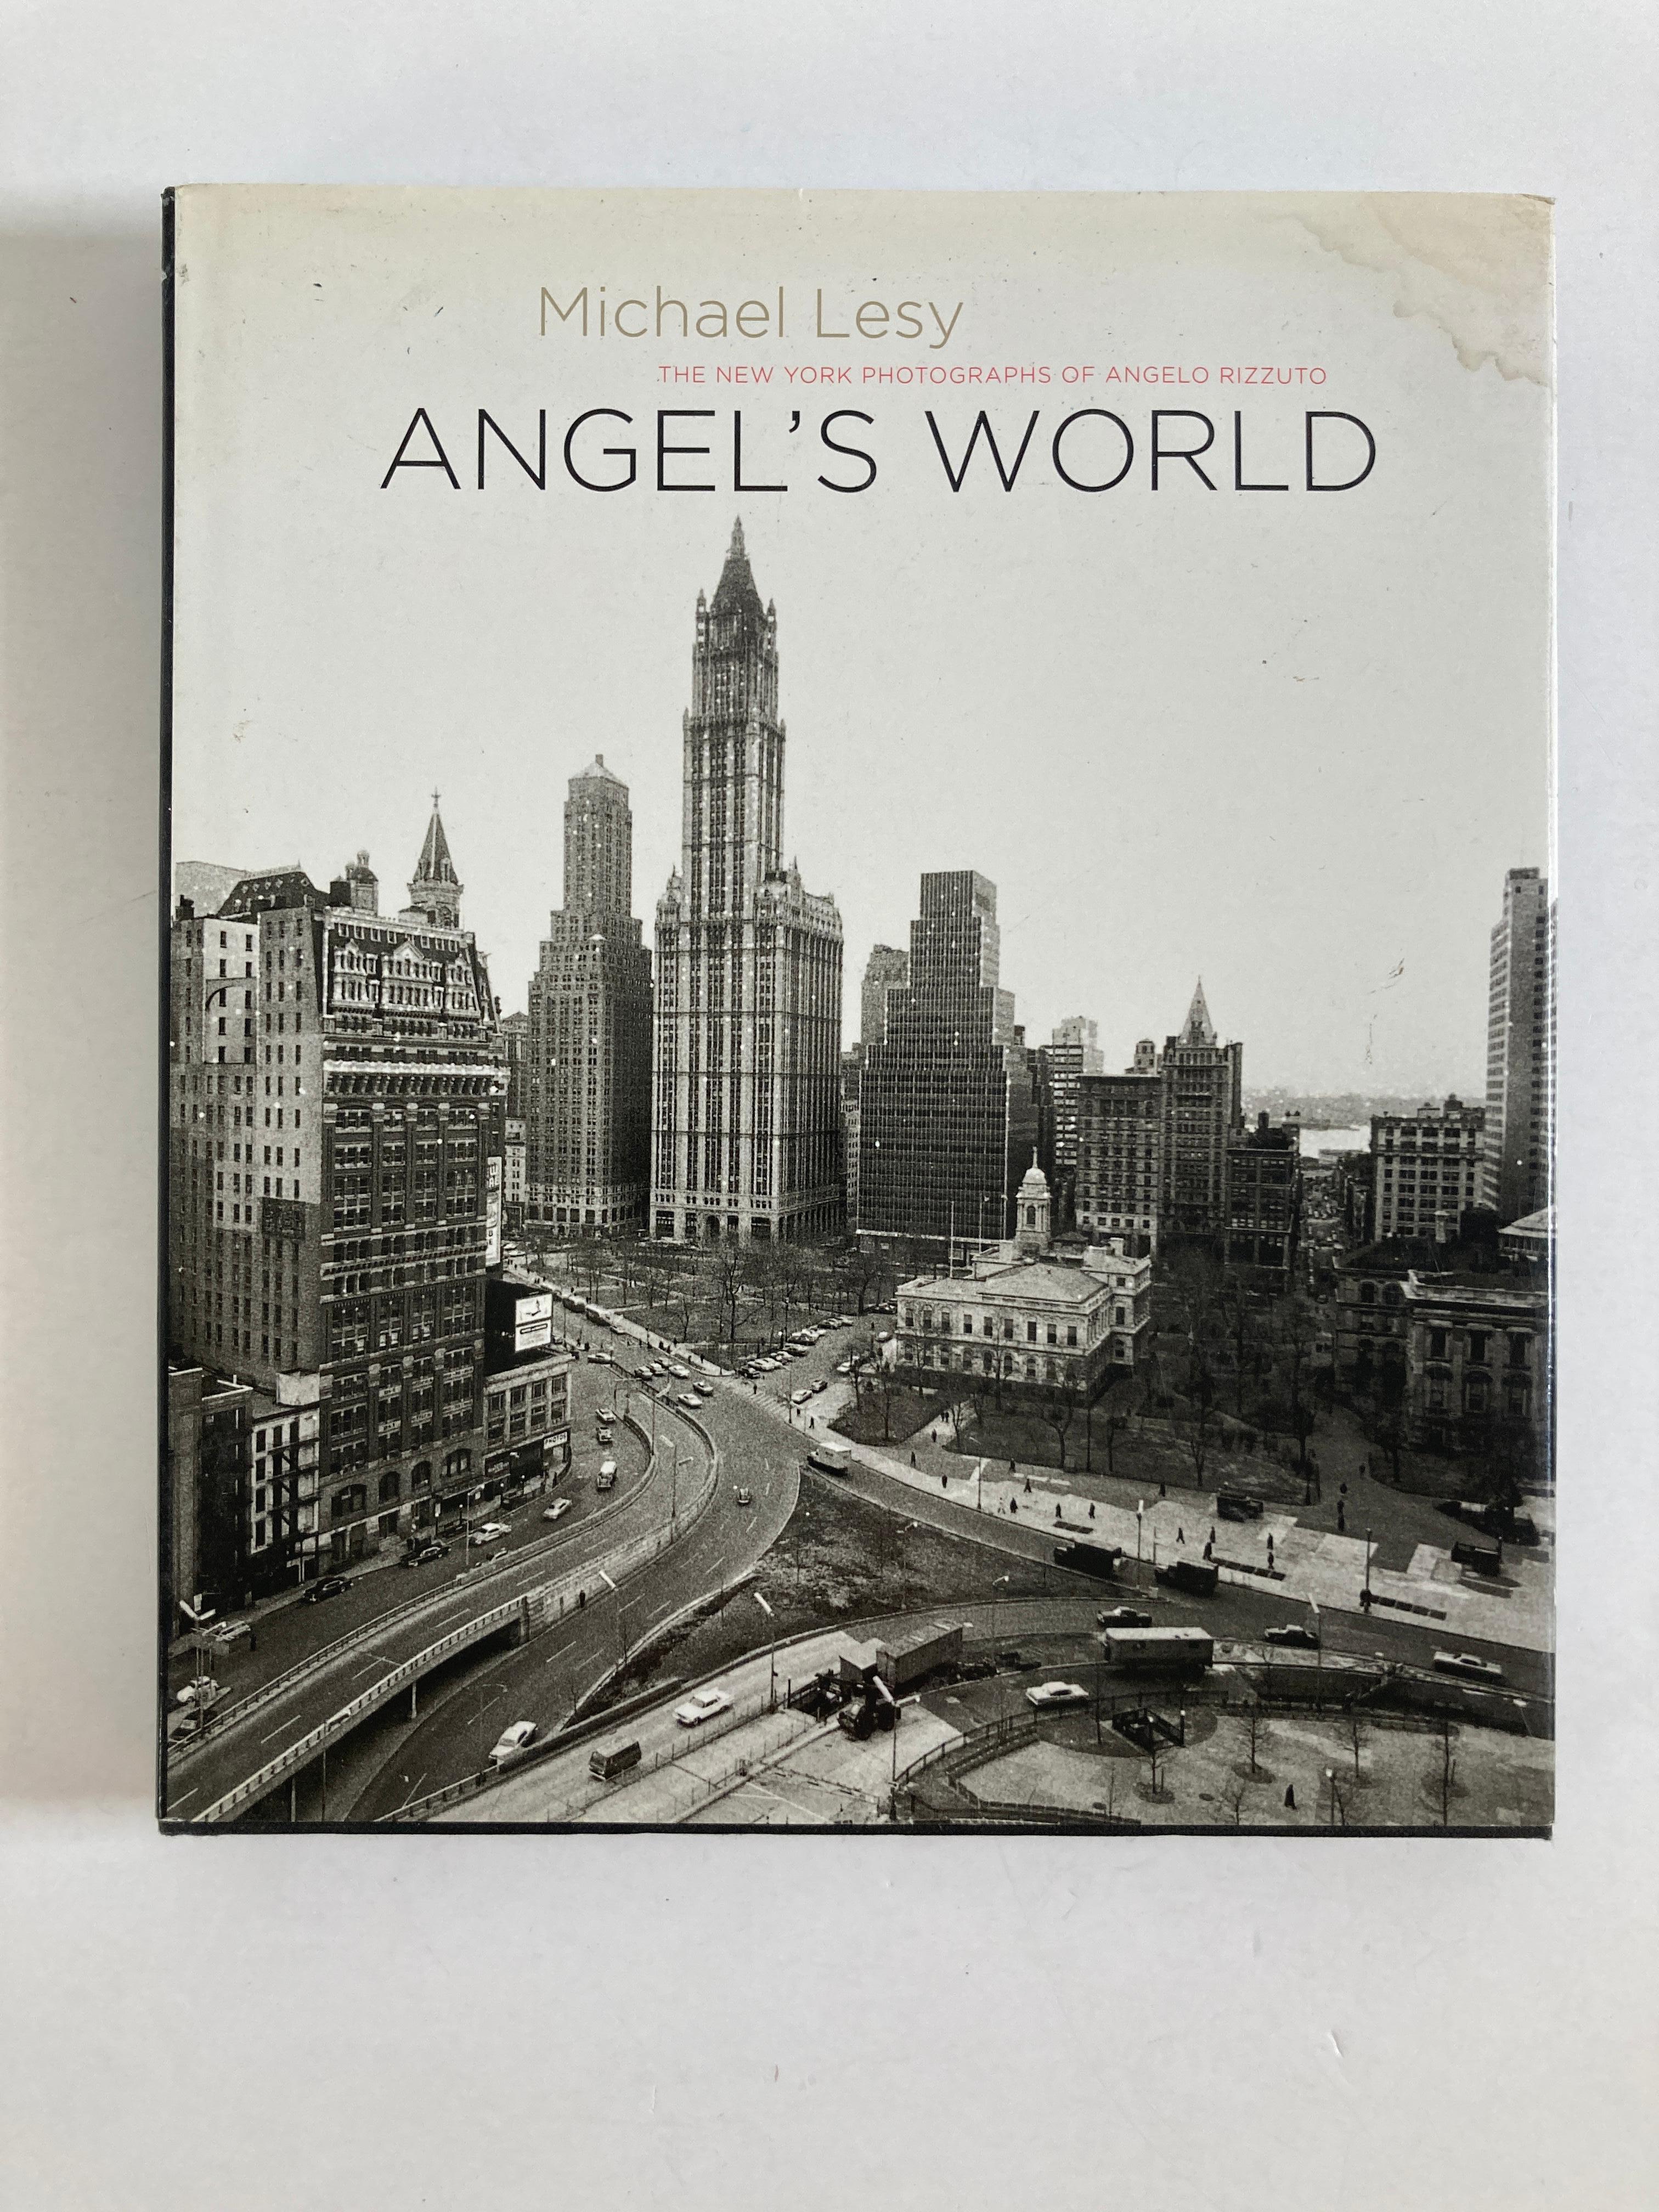 Angel's World: The New York Photographs of Angelo Rizzoto.
Lesy, Michael
First edition of this collection of photographs. Quarto, original black cloth, illustrated. Inscribed by Michael Lesy on the title page. Fine in a fine dust jacket. Jacket